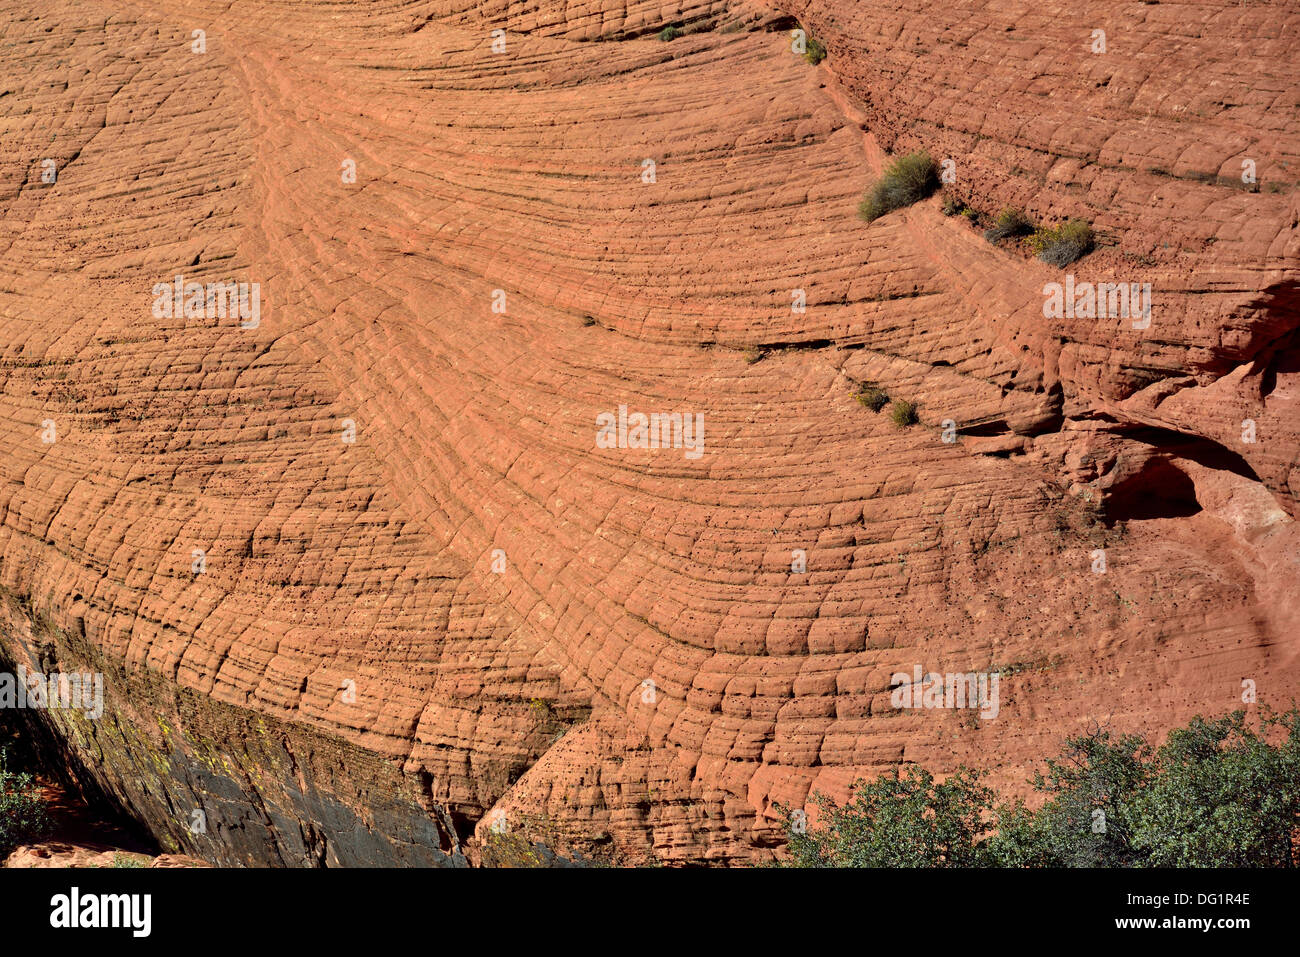 Crossbeds in eolian sandstone. Southern Utah, USA. Stock Photo